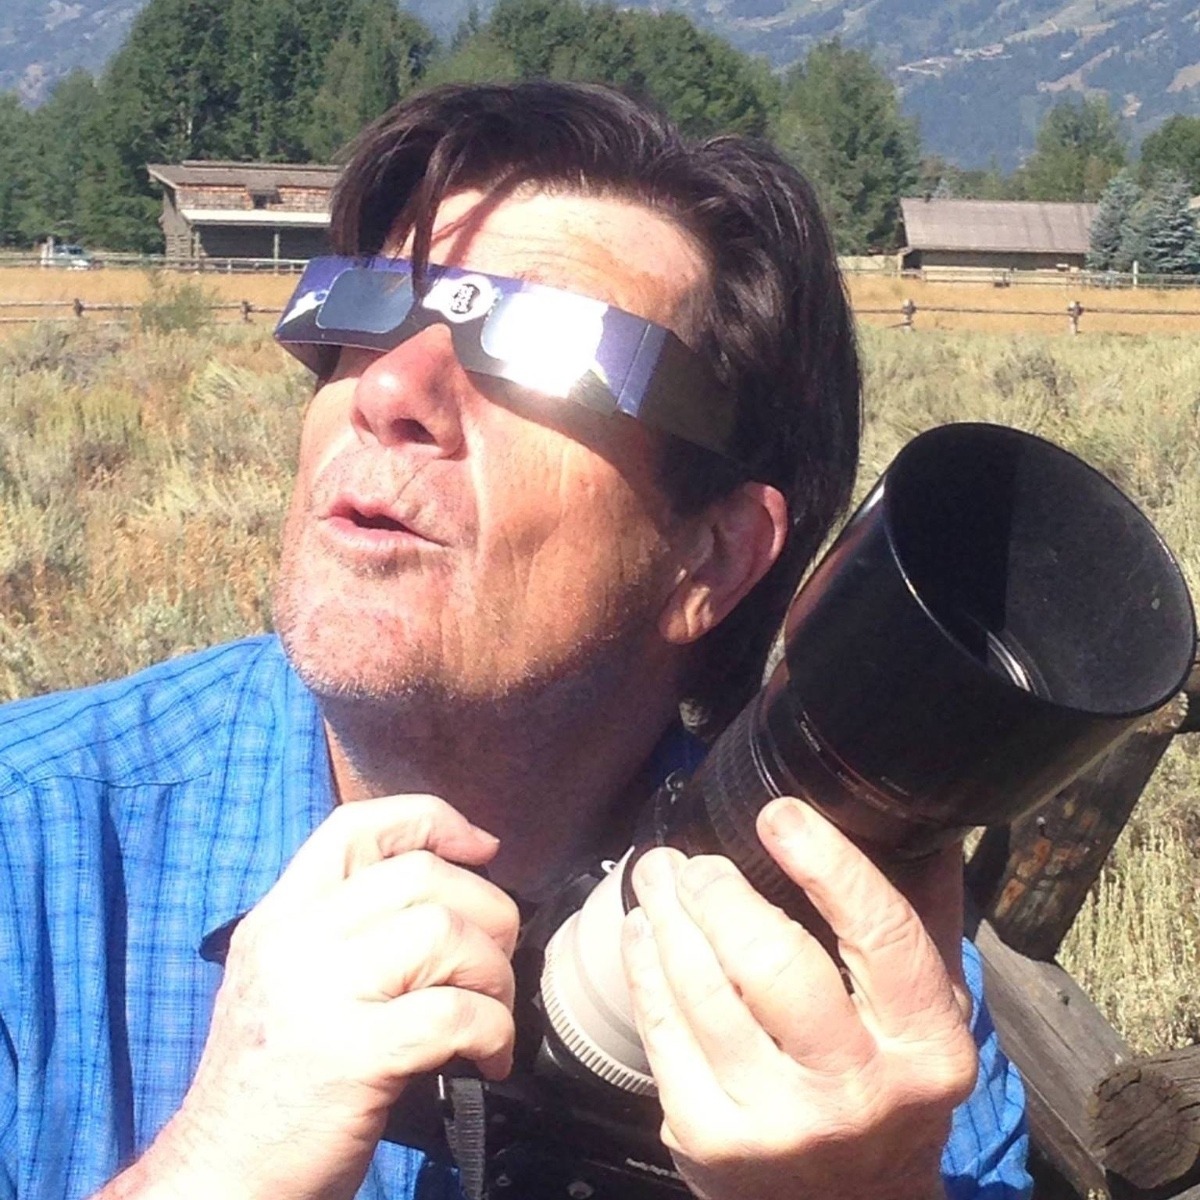 Embrace the mystery: Swift called after the eclipse and described it as a profoundly meaningful experience, especially because it was shared with his son, Dyson, who took this photo of his Dad. David gladly circulated it on social media with this description:  &quot;Dyson shot me brandishing my moue of wonder and a hybrid flare-shoo.&quot;